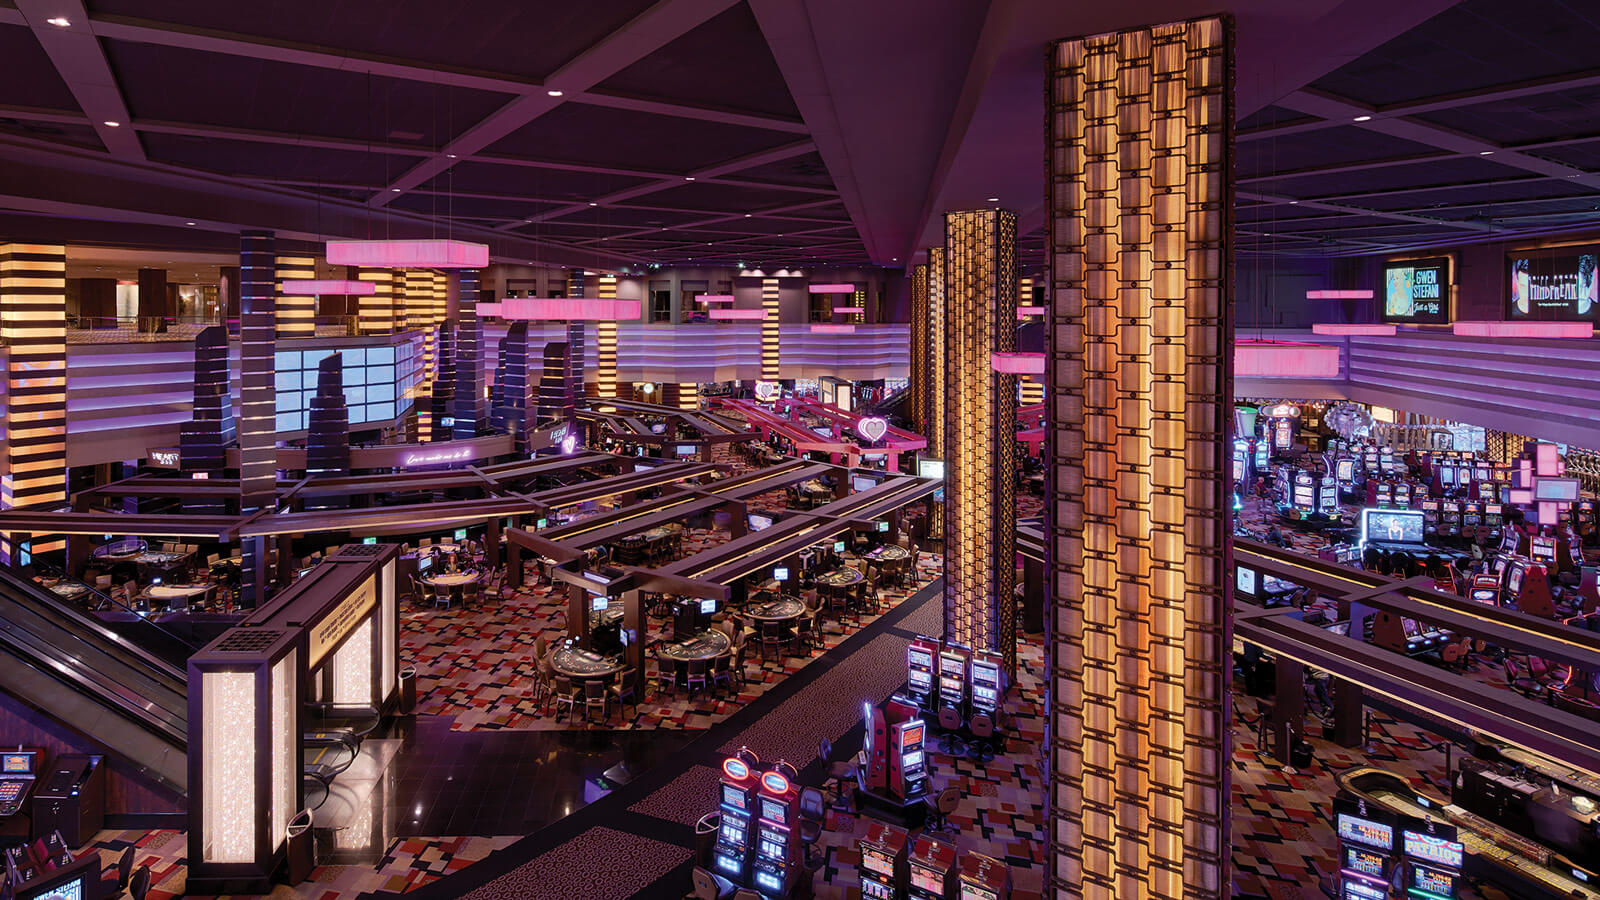 Horseshoe officially changes to Bally's, Casinos & Gaming